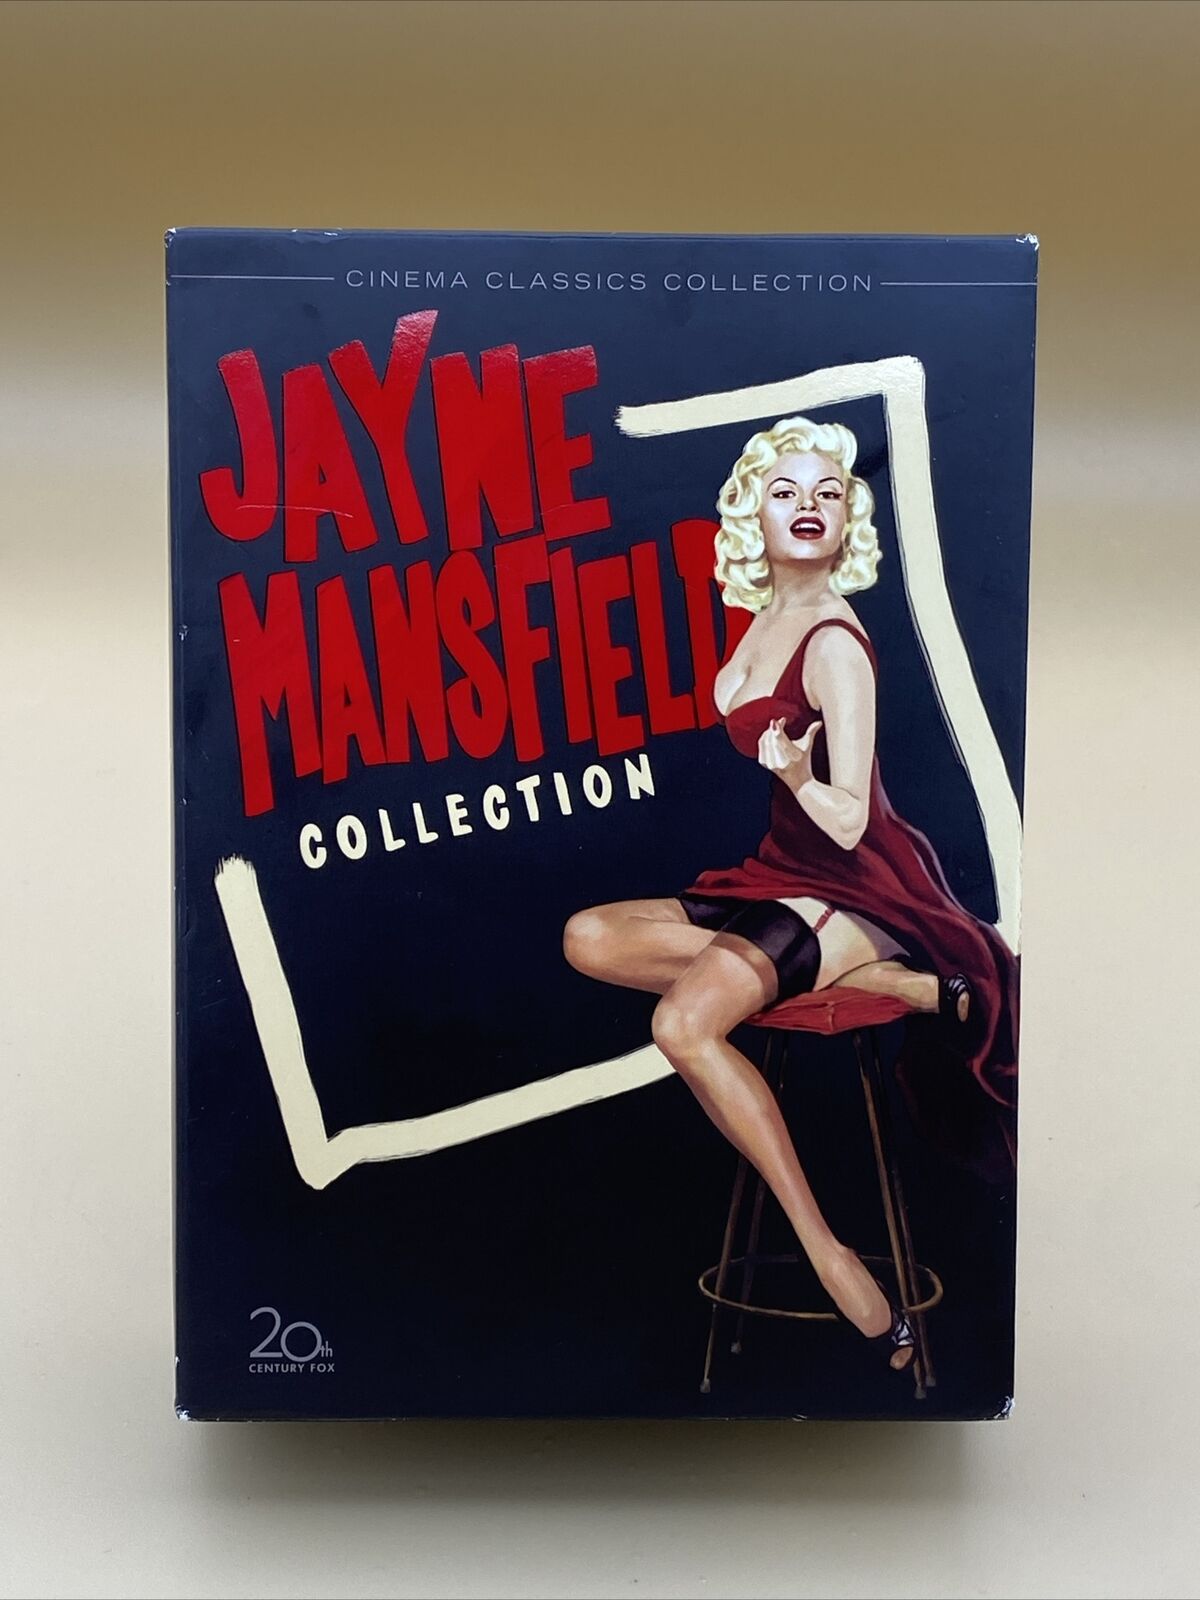 JAYNE MANSFIELD COLLECTION (3-DVD Set, 2006, 3-Disc Set) Inc Lobby Cards